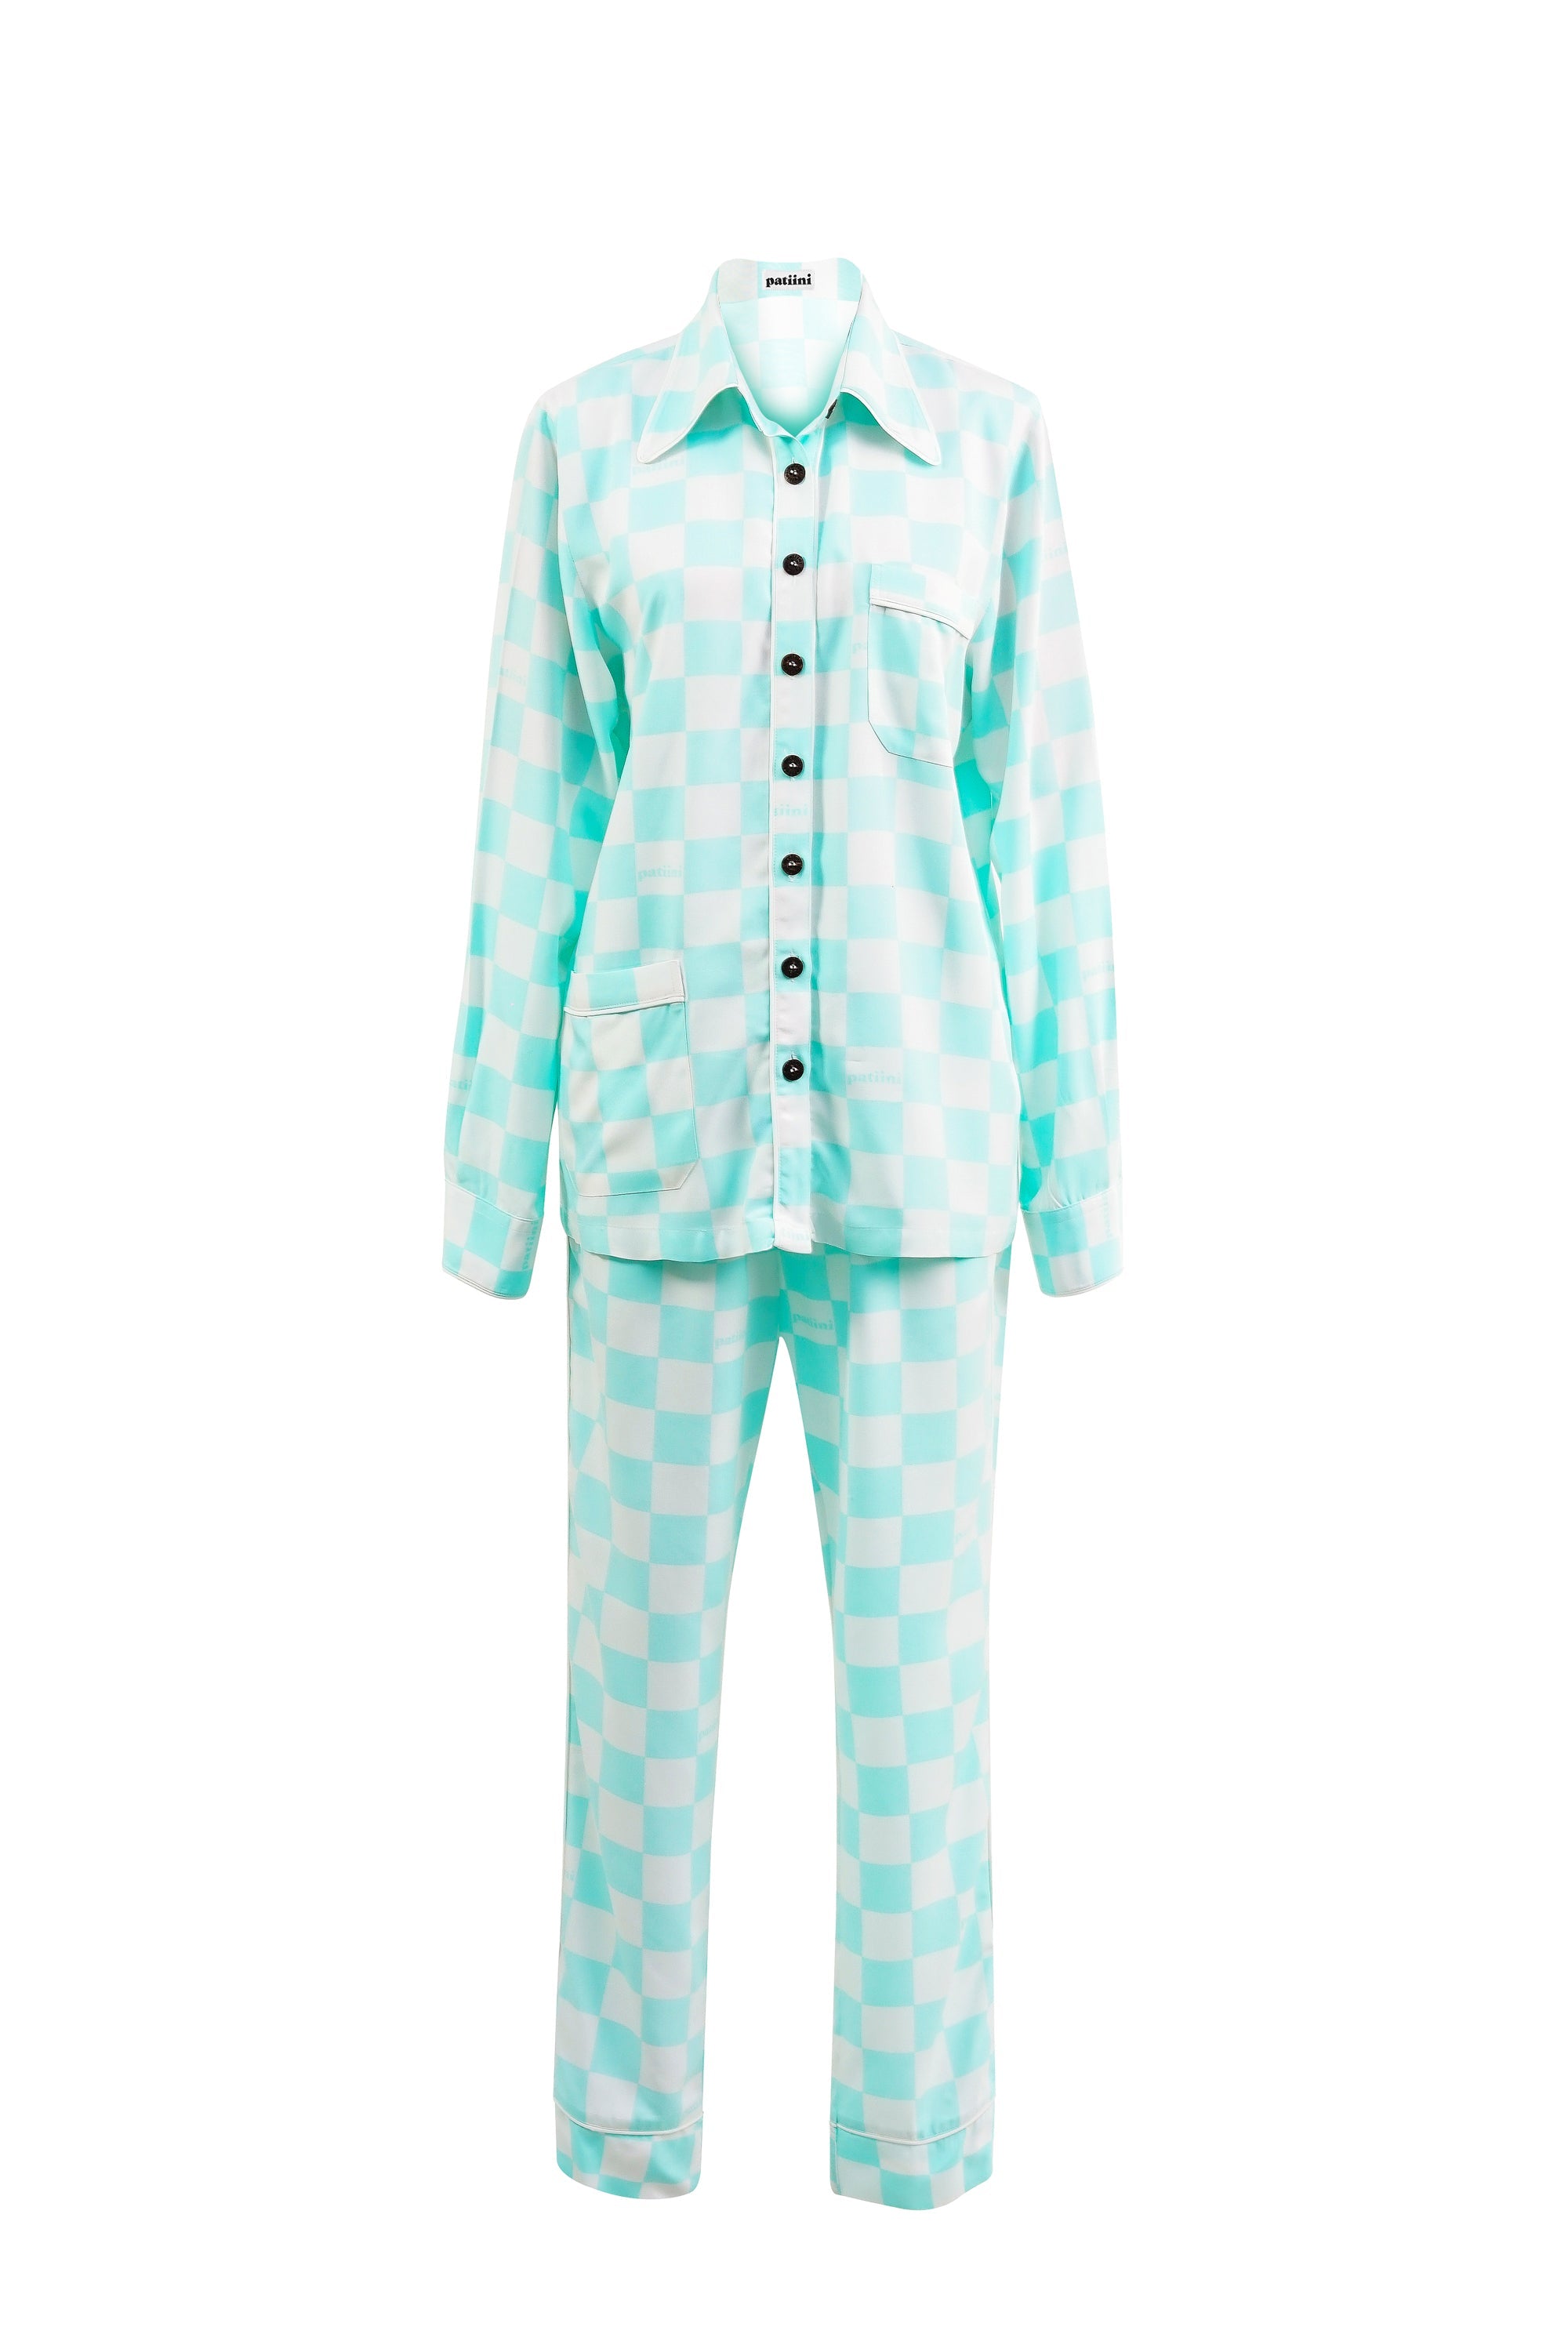 White and teal checkered long-sleeve pajama set with white piping.